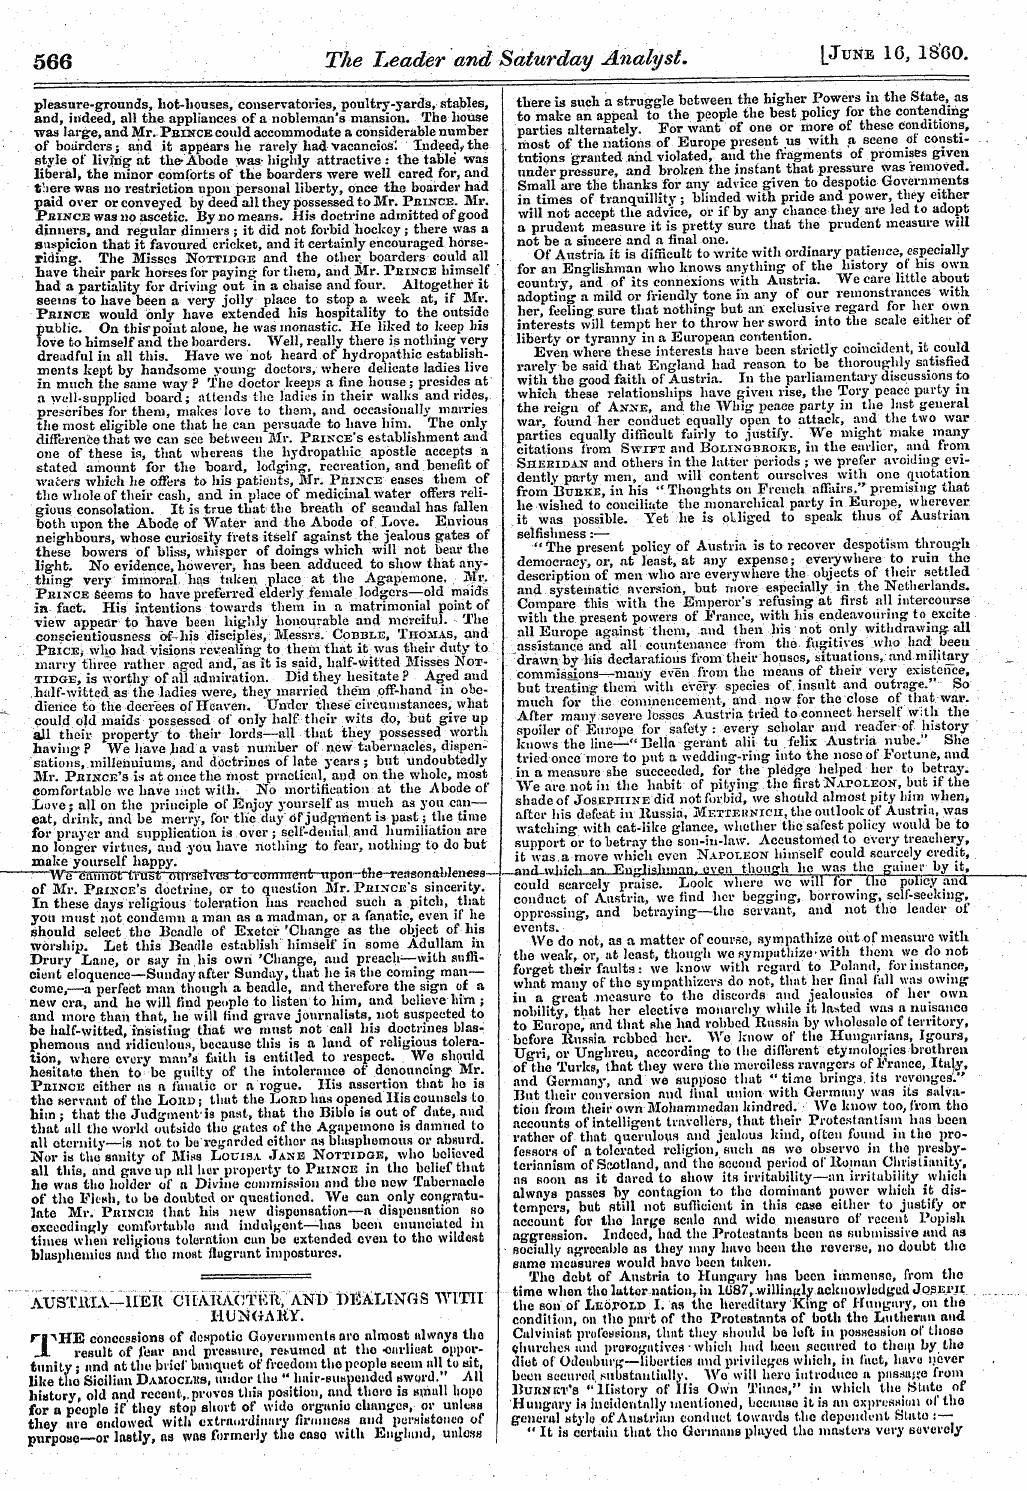 Leader (1850-1860): jS F Y, 2nd edition: 10